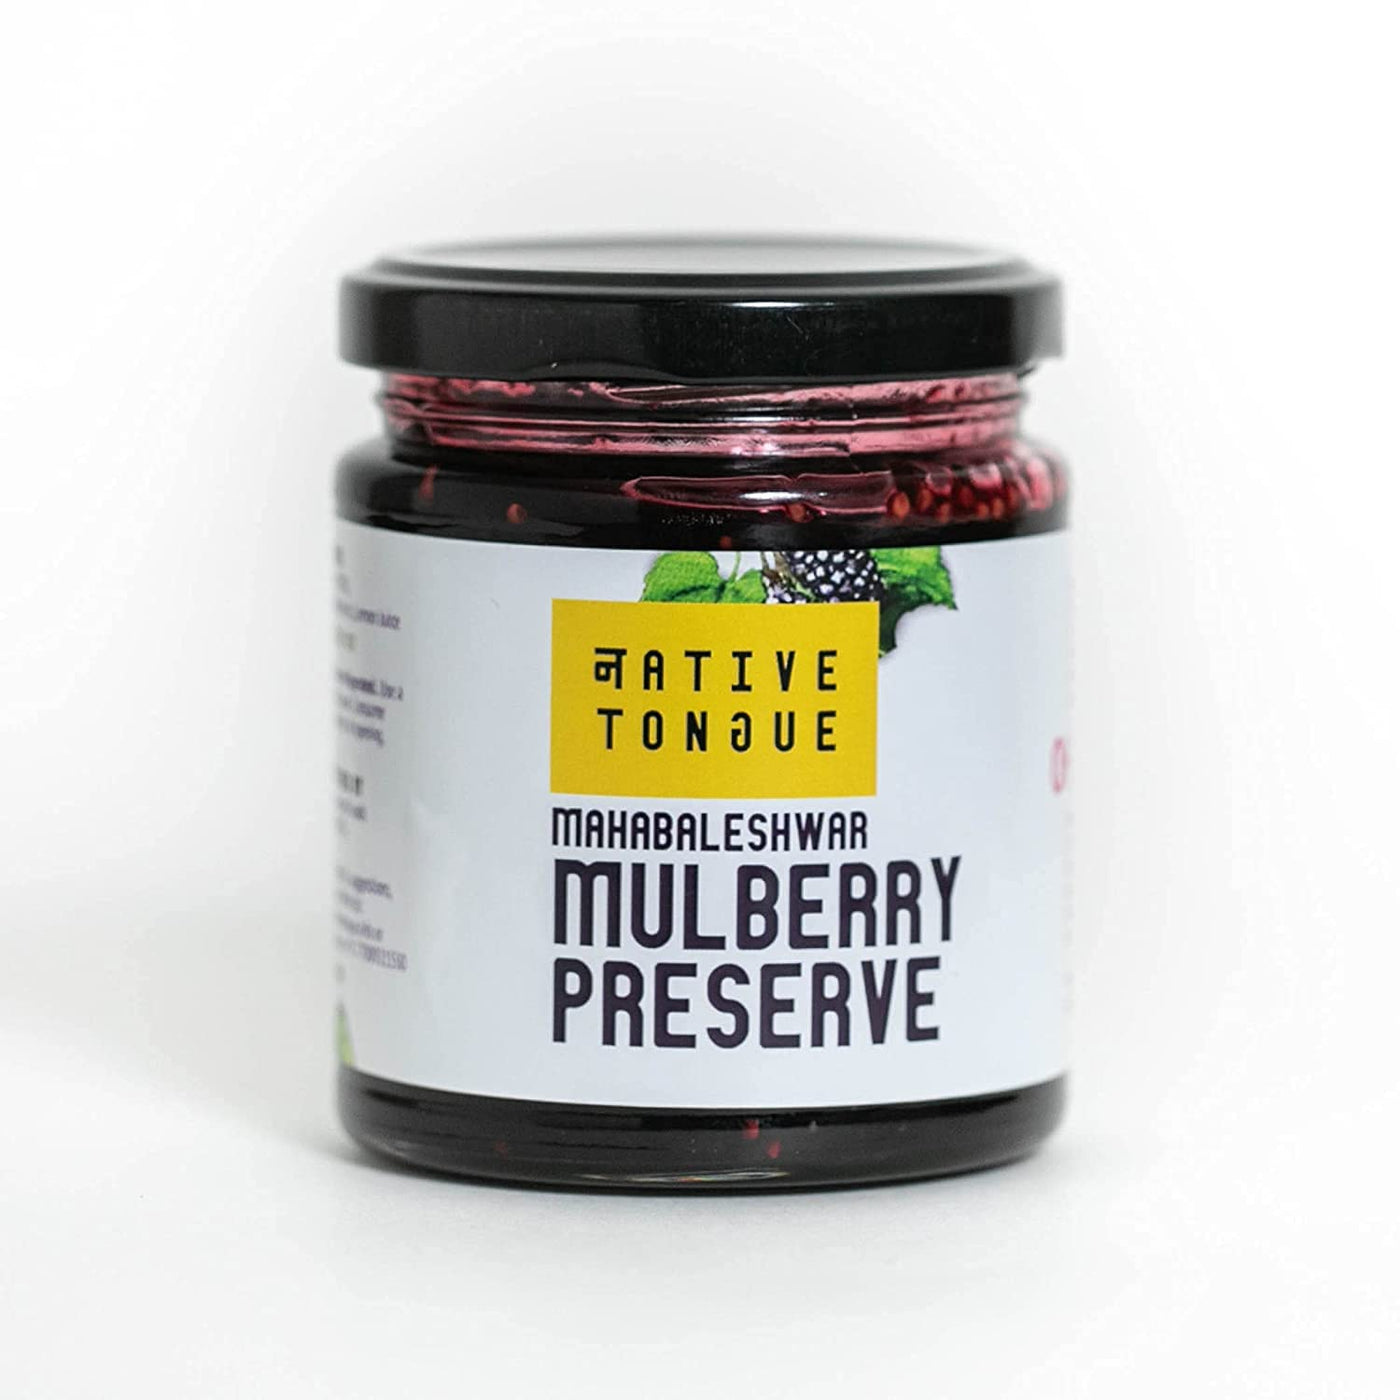 Mulberries, locally known as Shahtoot or Tuti, from the hilly slopes of Mahableshwar, made into a chunky preserve will take you back to delightful memories of grandma’s backyard.